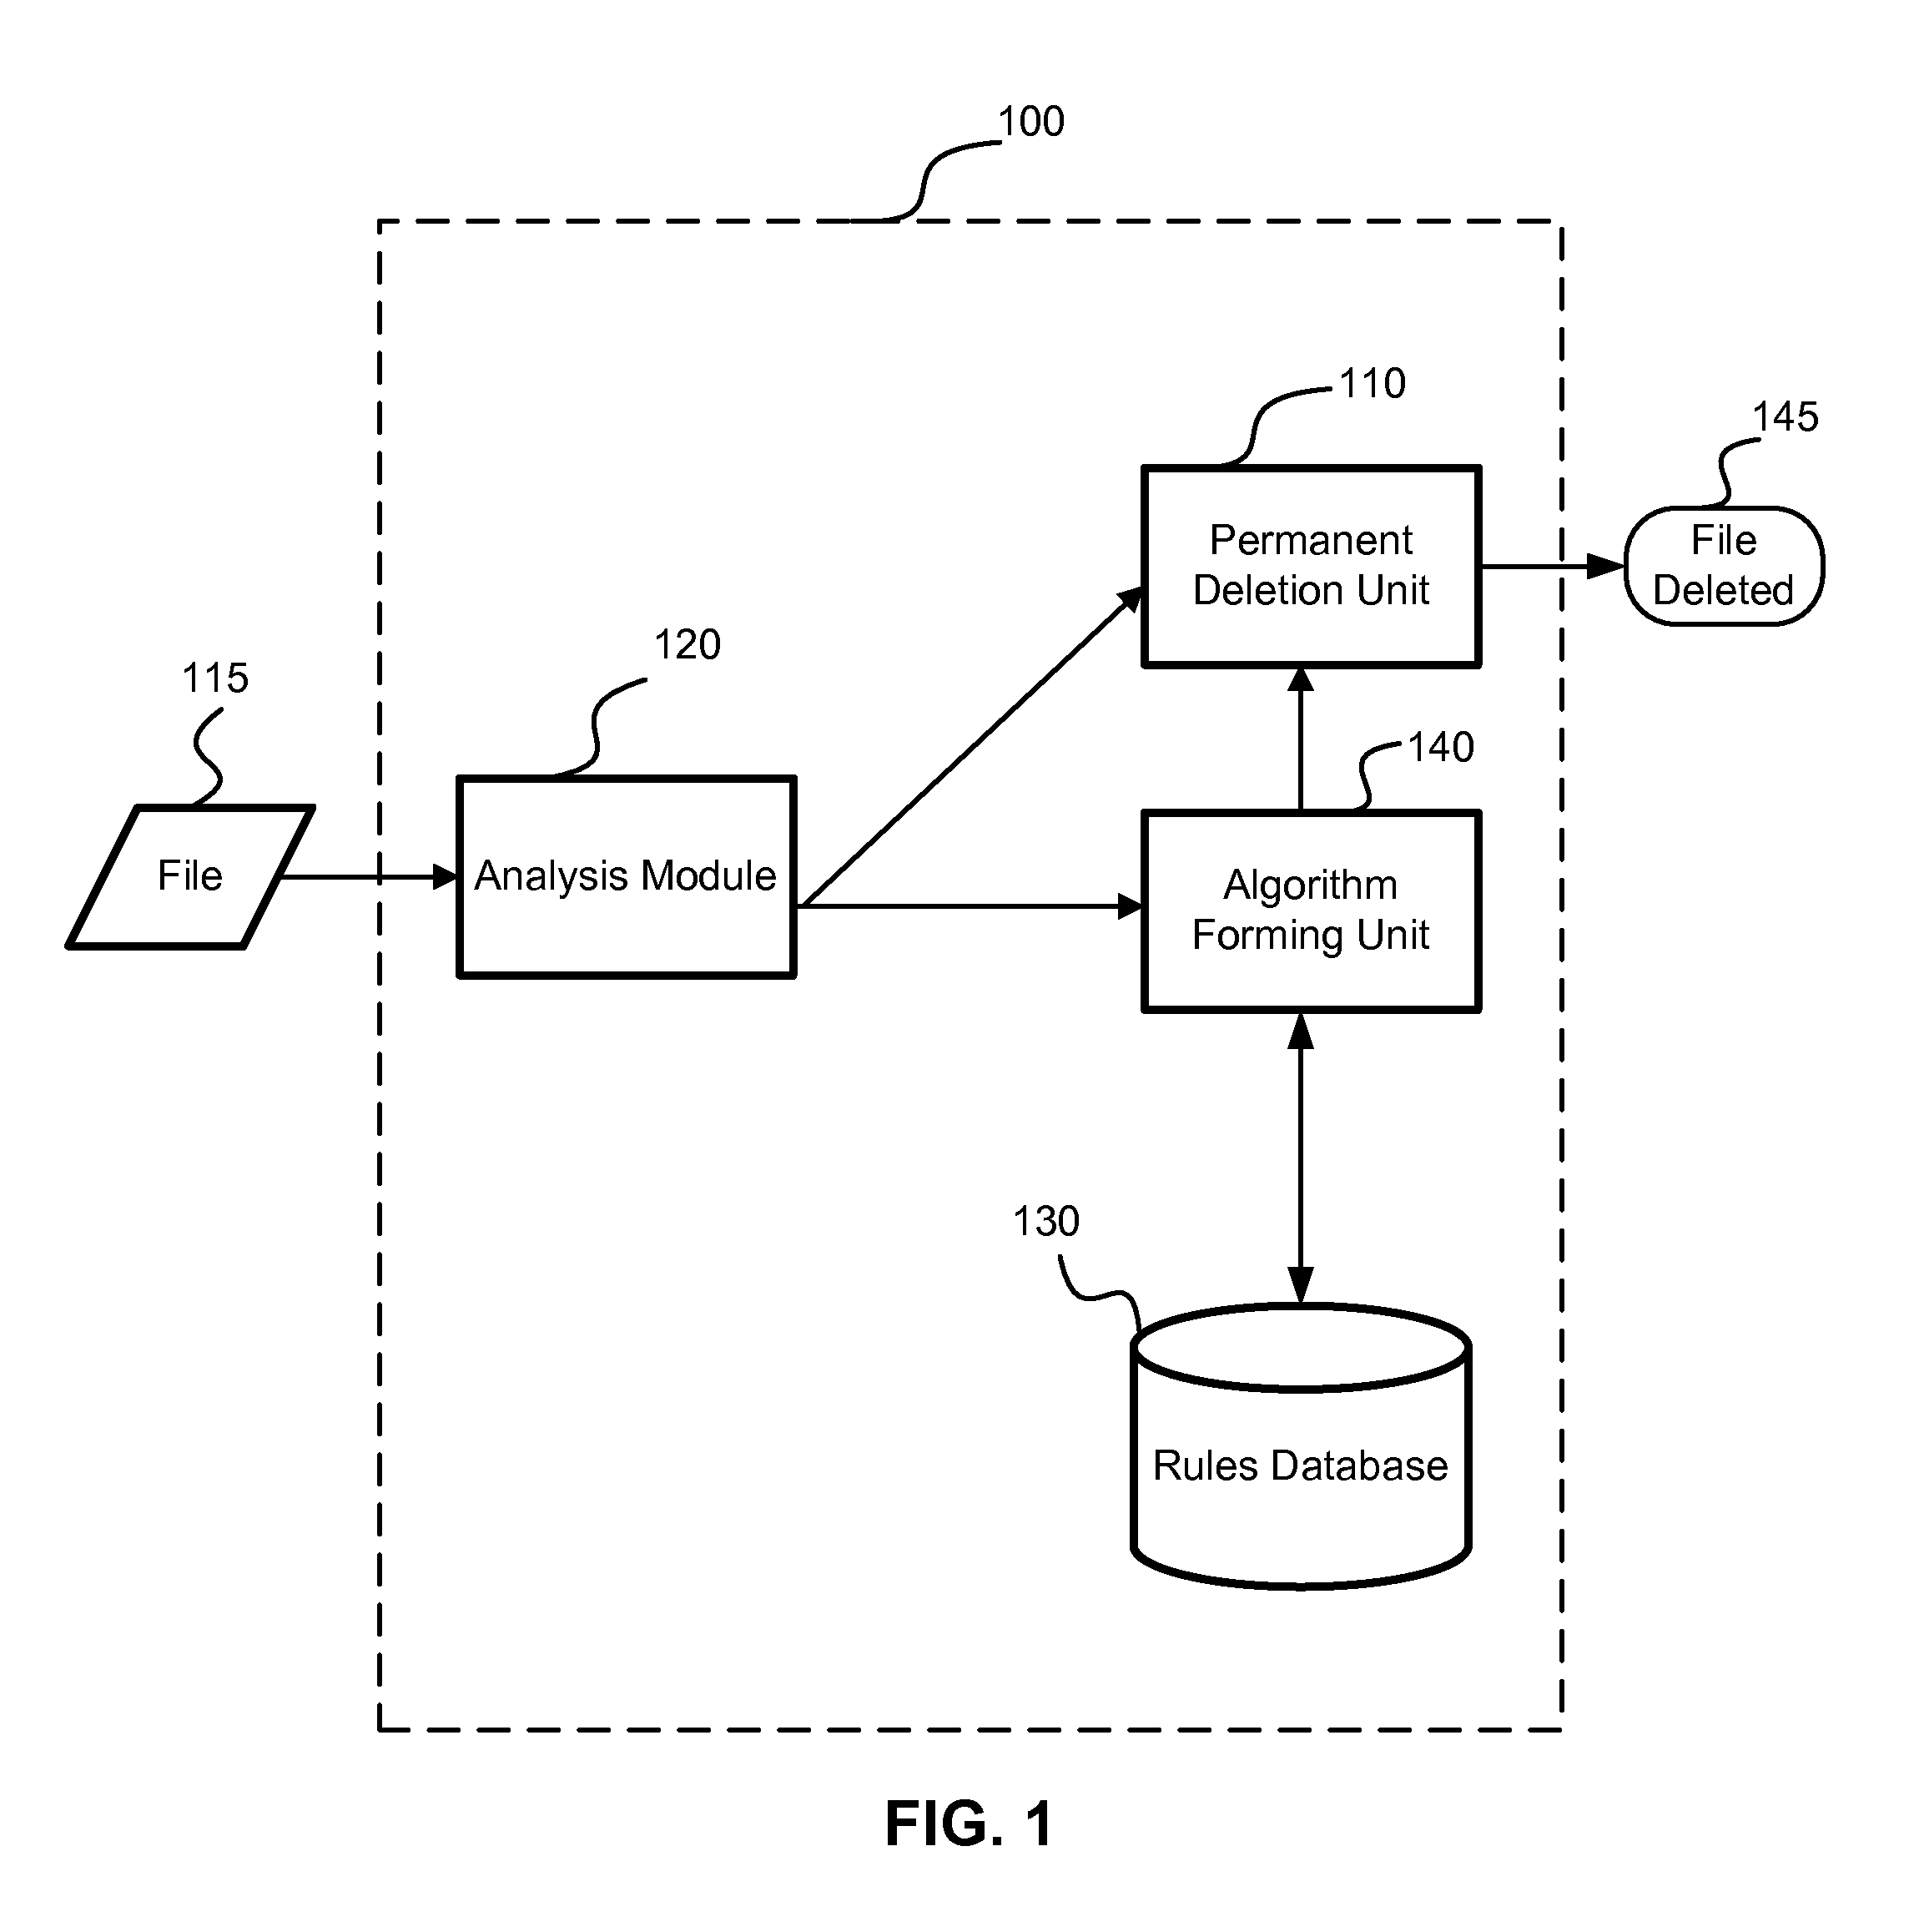 System for permanent file deletion